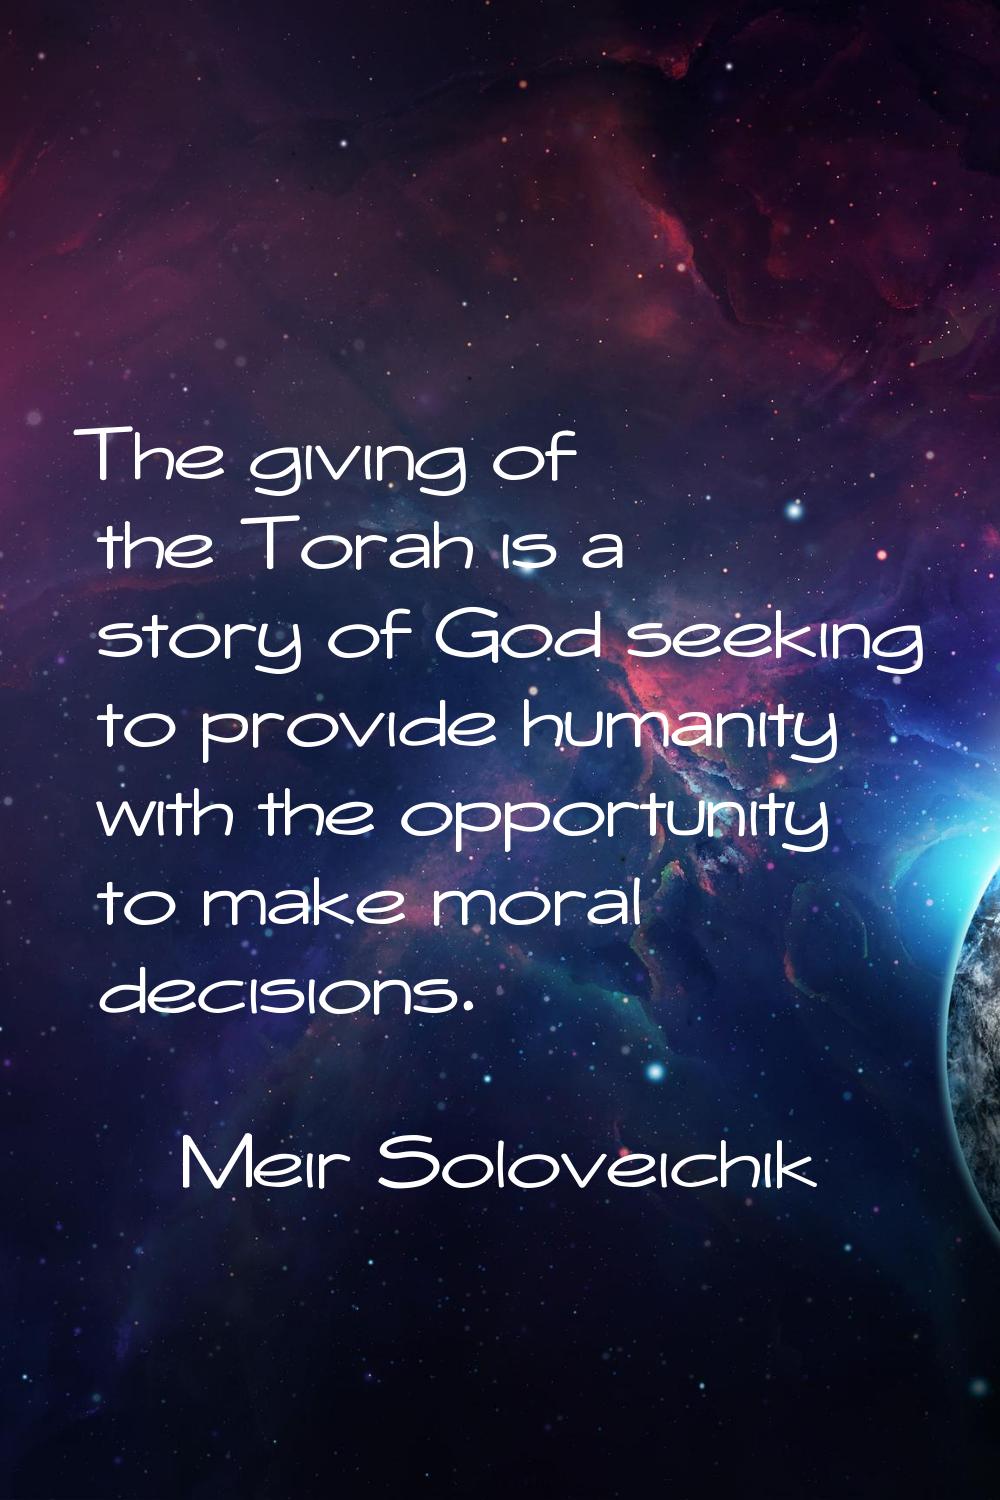 The giving of the Torah is a story of God seeking to provide humanity with the opportunity to make 